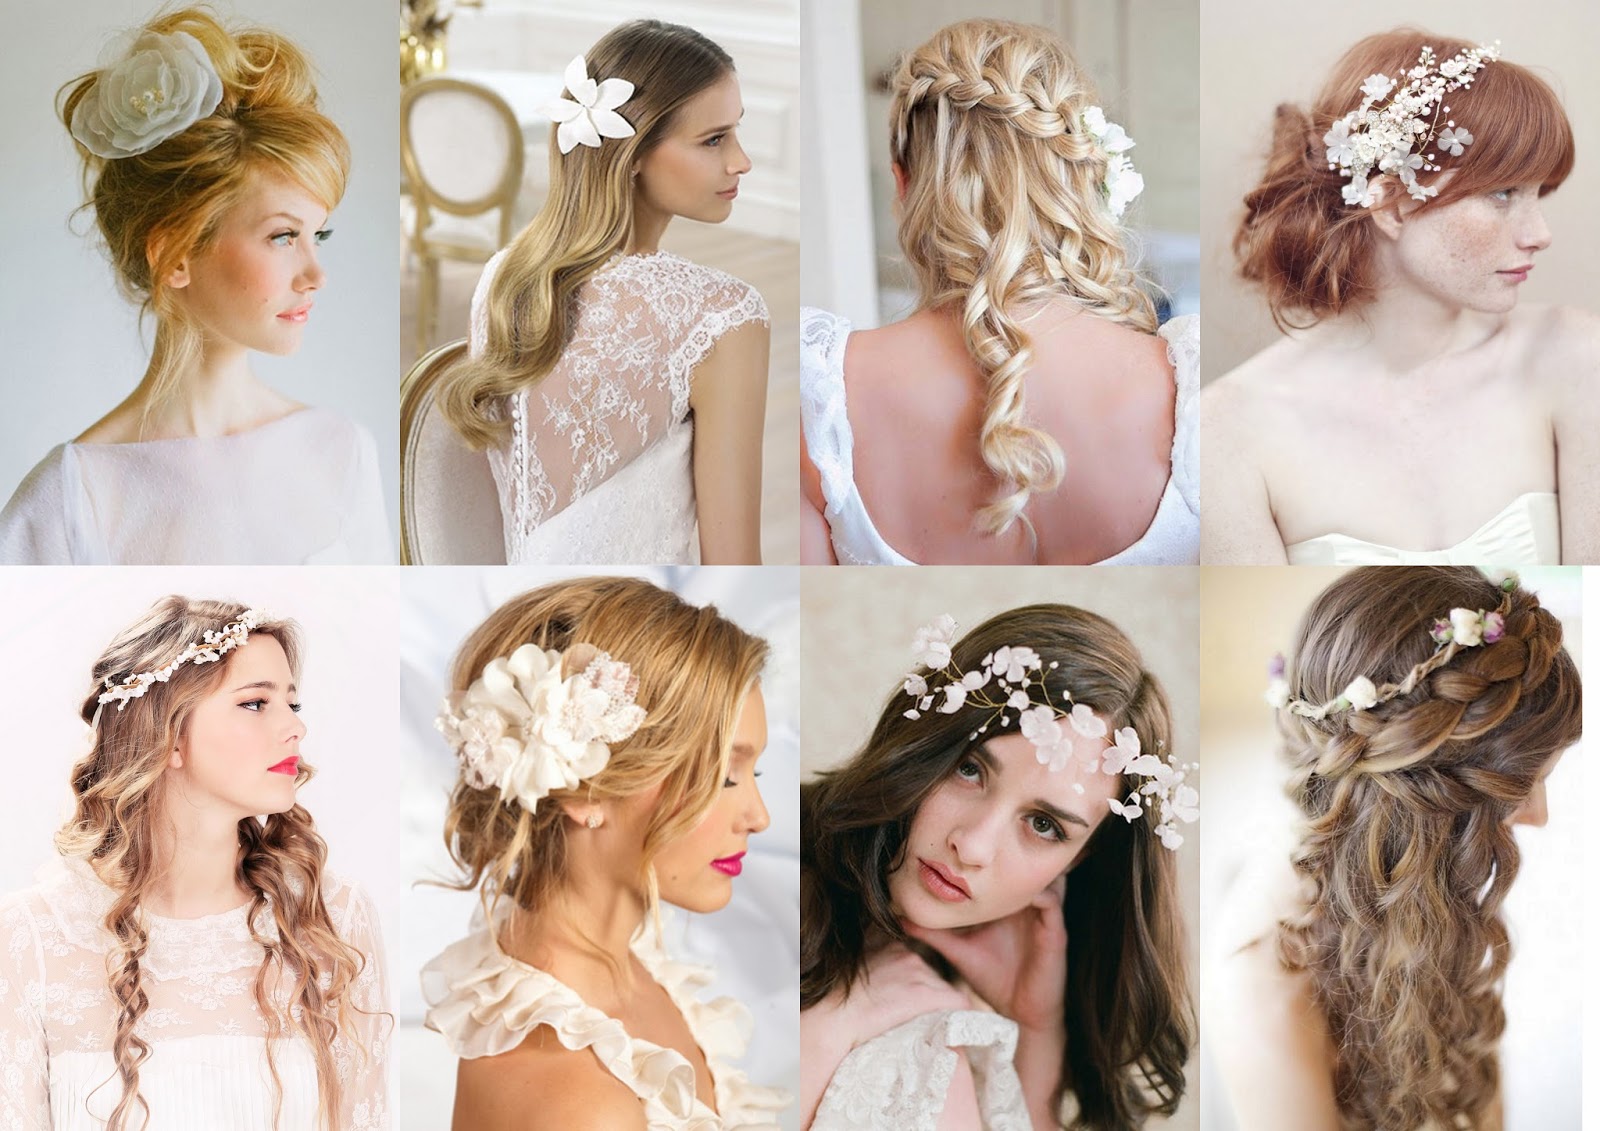 78 Great Wedding Hairstyles Ideas This Autumn You Should Try Out | Guest  hair, Long hair wedding styles, Bridesmaid hair inspo